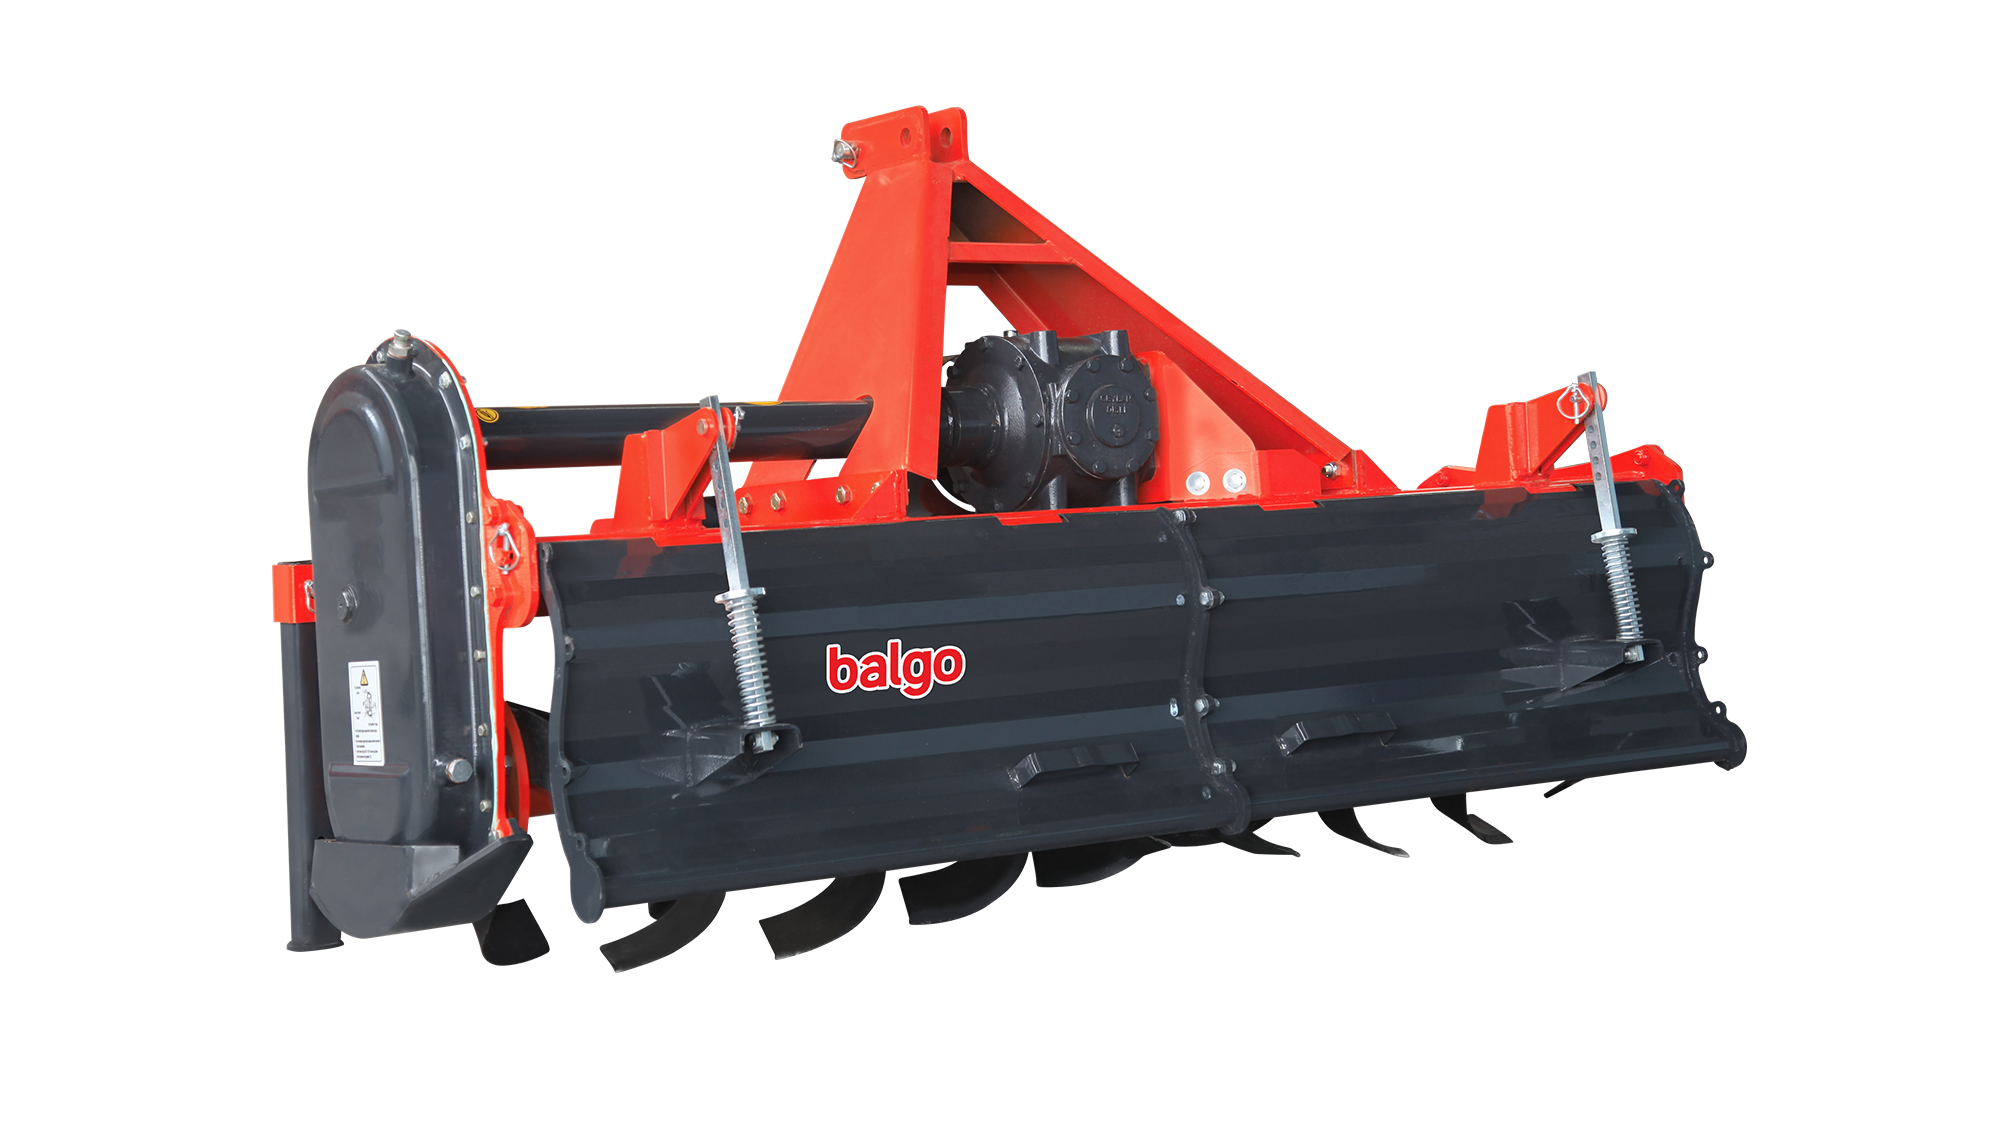 Balgo Agricultural Machinery | Rotary Tiller, Variable Speed Rotary Tiller, Power Harrow, Agricultural Machinery Rotary Tiller, Garden Type Rotary Tiller, Garden Type Mini Rotary Tiller, Garden Type Mechanical Rotary Tiller, Garden Type Hydraulic Rotary Tiller, Field Type Rotary Tiller, Side Movement Mulcher, Hydraulic Mulcher, Double Sided Mulcher, Balgo Agricultural Machinery, Mulchers, Balgo Agricultural Machinery Inter Row Cultivator, Inter Row Cultivator, Flail Mower  Agricultural Machinery